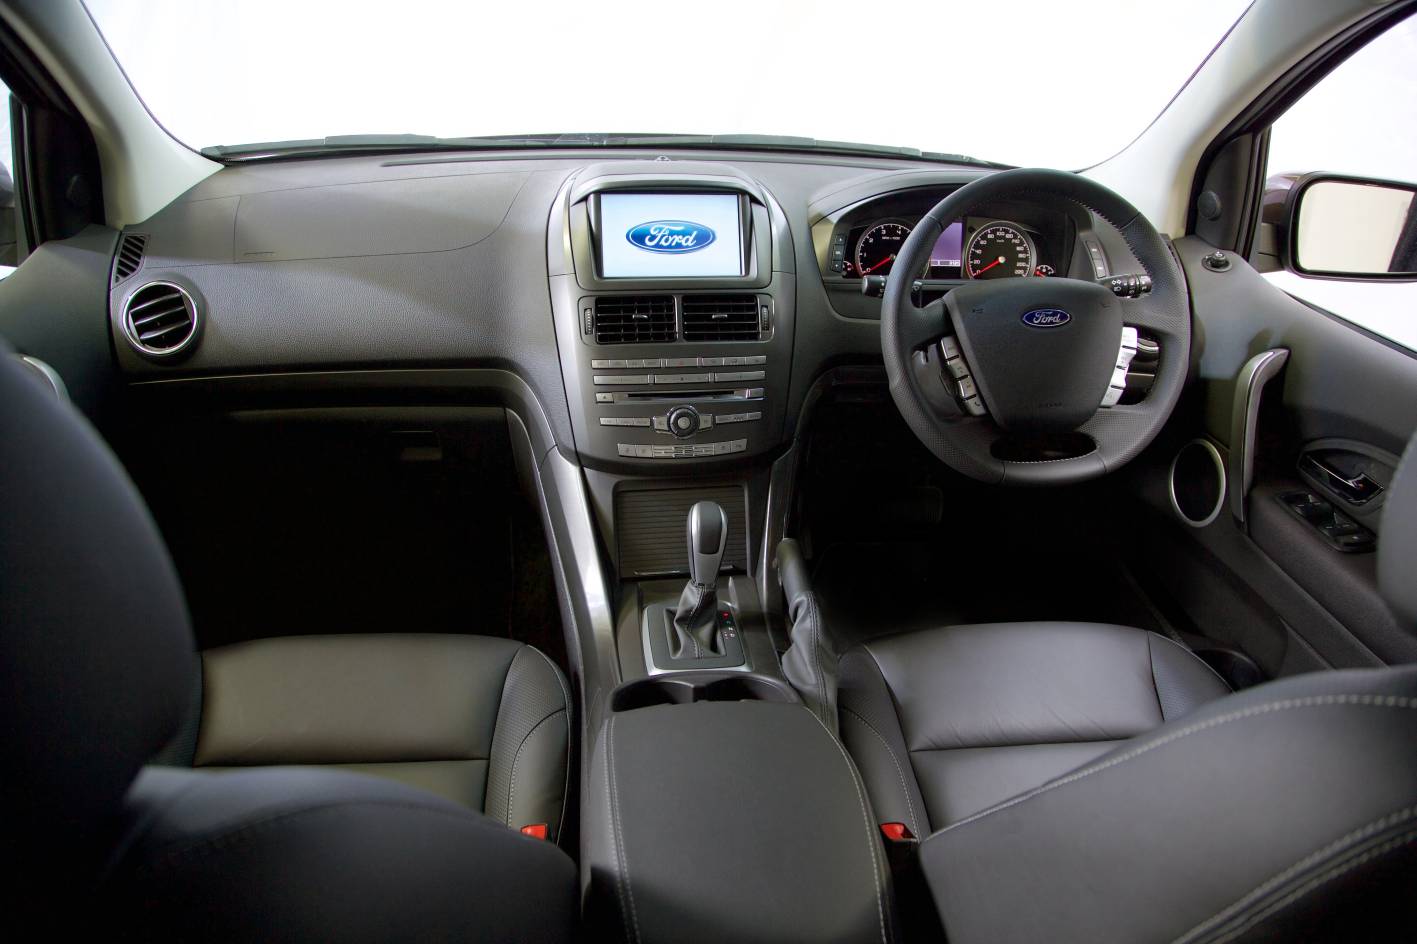 2015 Ford Territory Review Auto Expert By John Cadogan